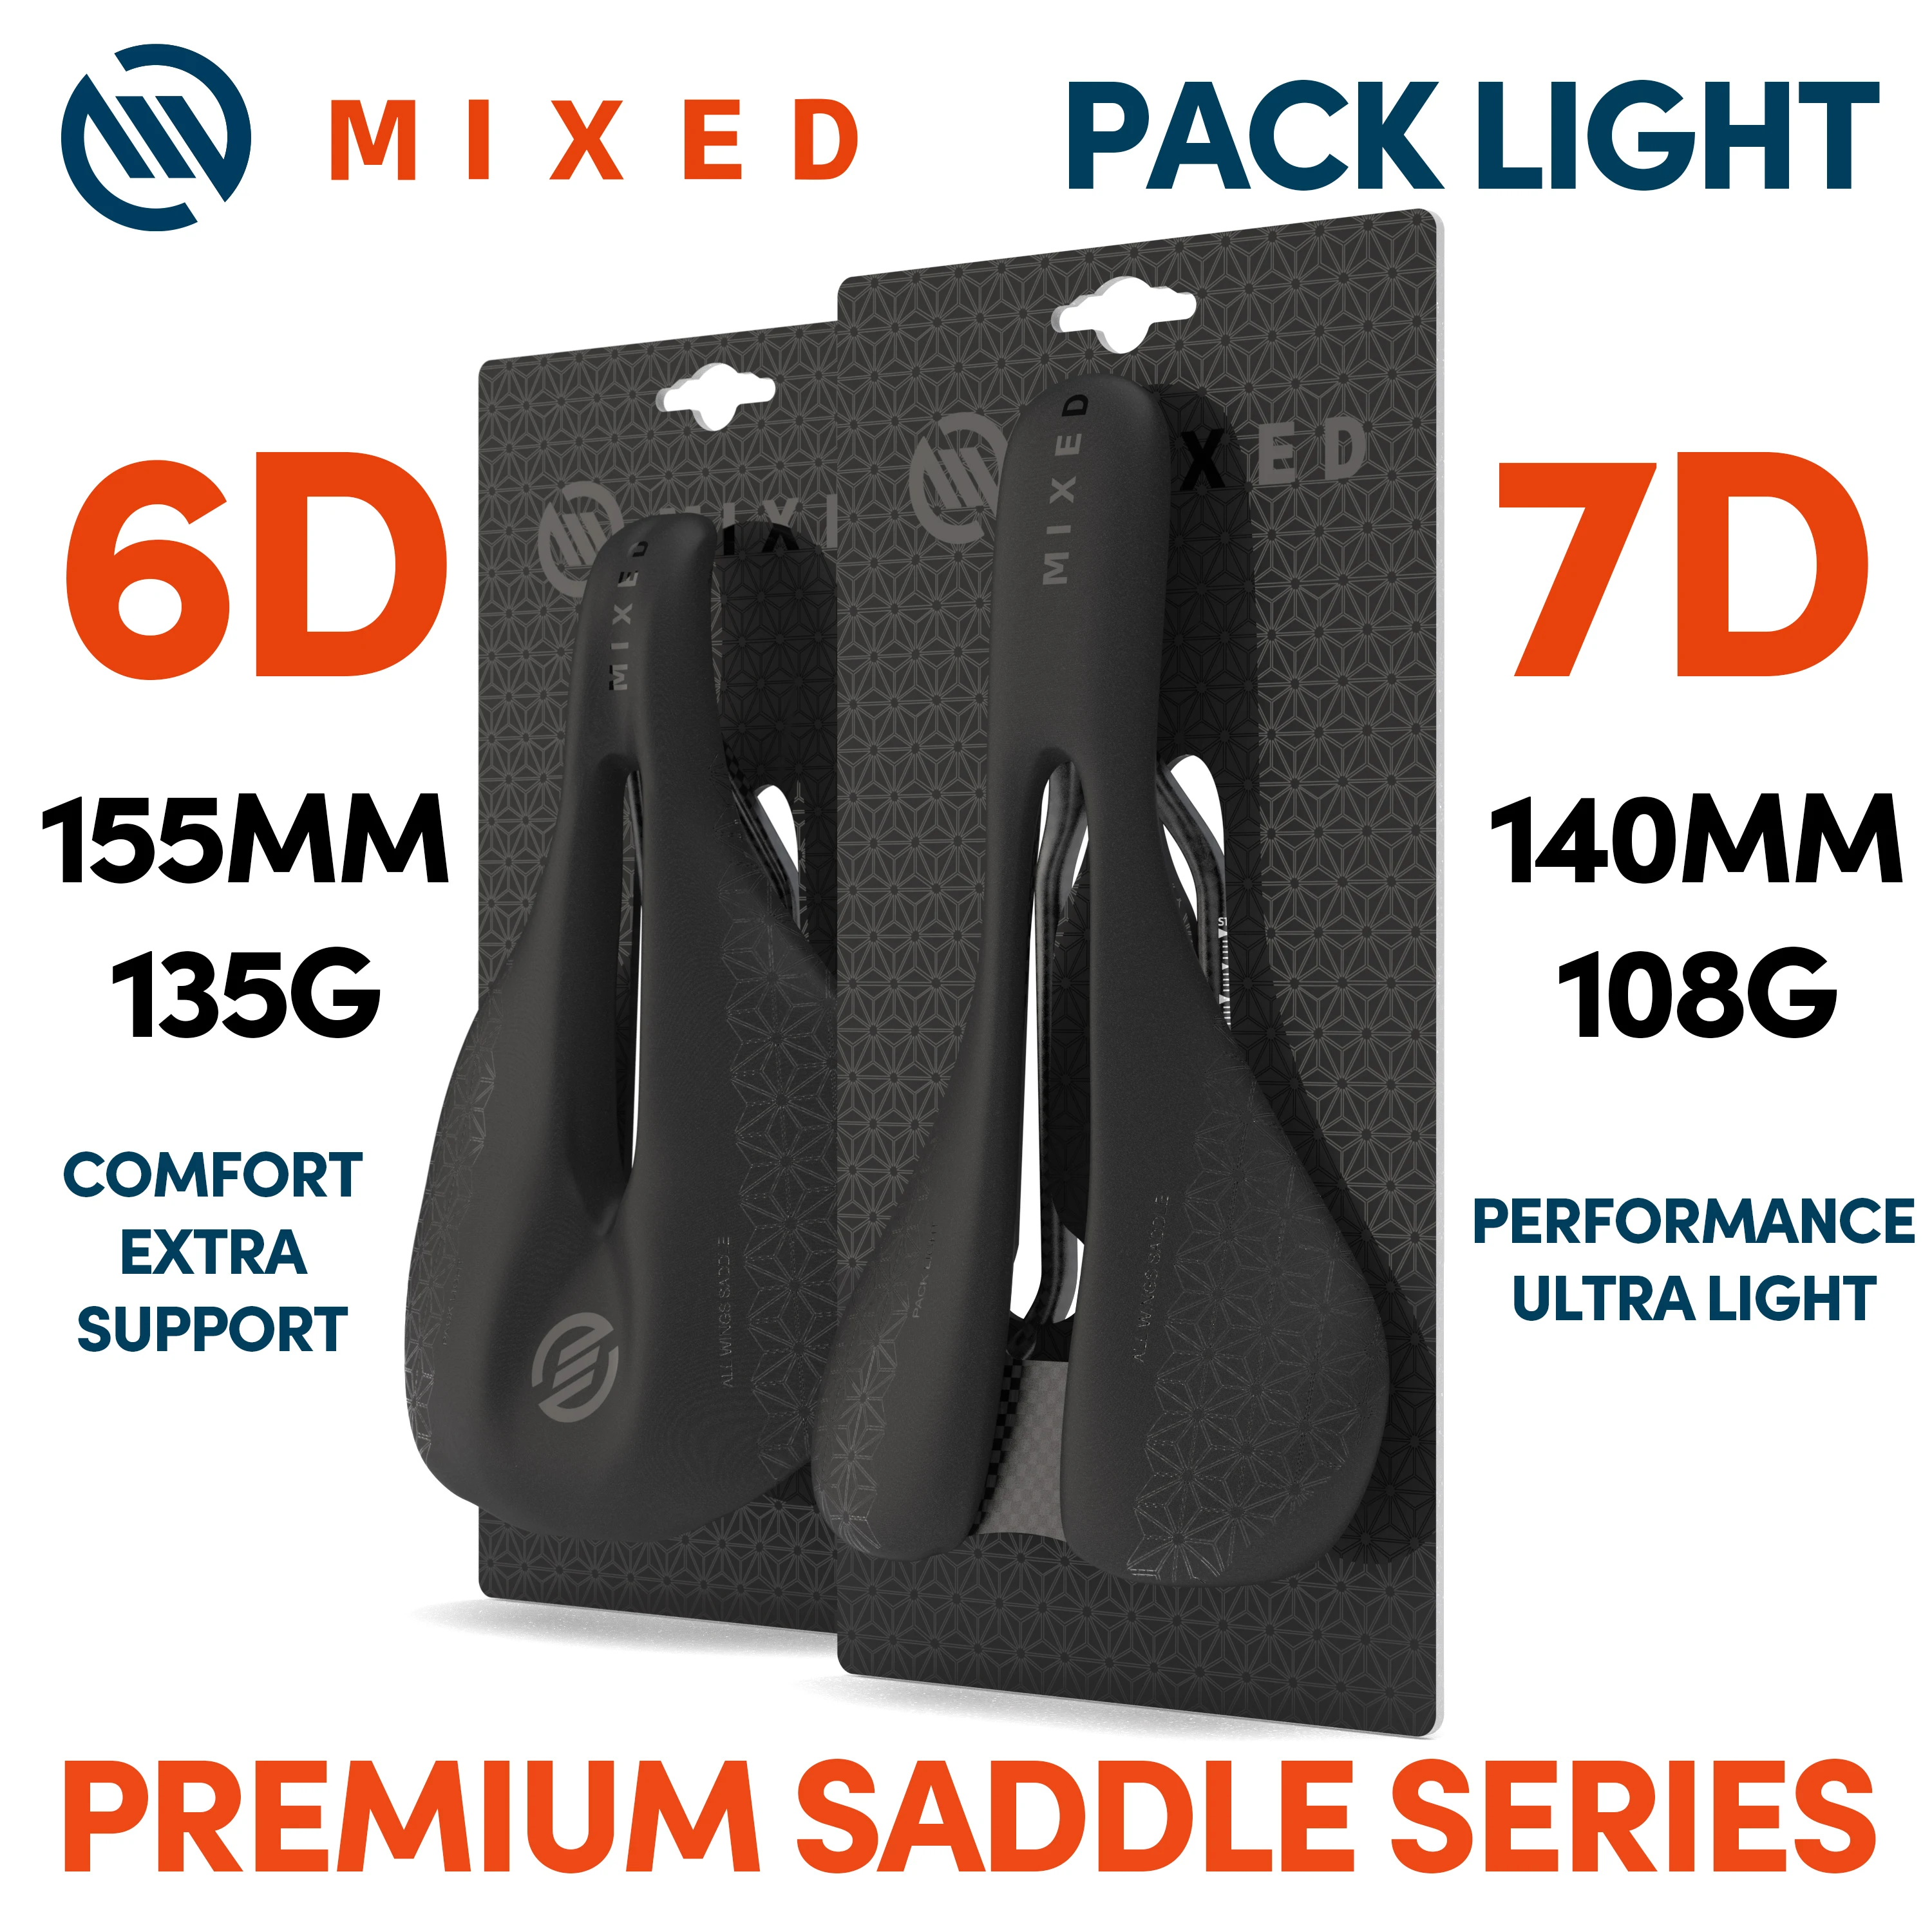 MIXED Full Carbon Fiber Saddle Pack 5D 6D 7D Ultra Light Weight Cushion 143mm 155mm for MTB Mountain Bicycle Road Bike Parts china factory price wheelset rim toray t700 carbon fiber accessories erd 545mm light weight bike road bicycle rim free shipping